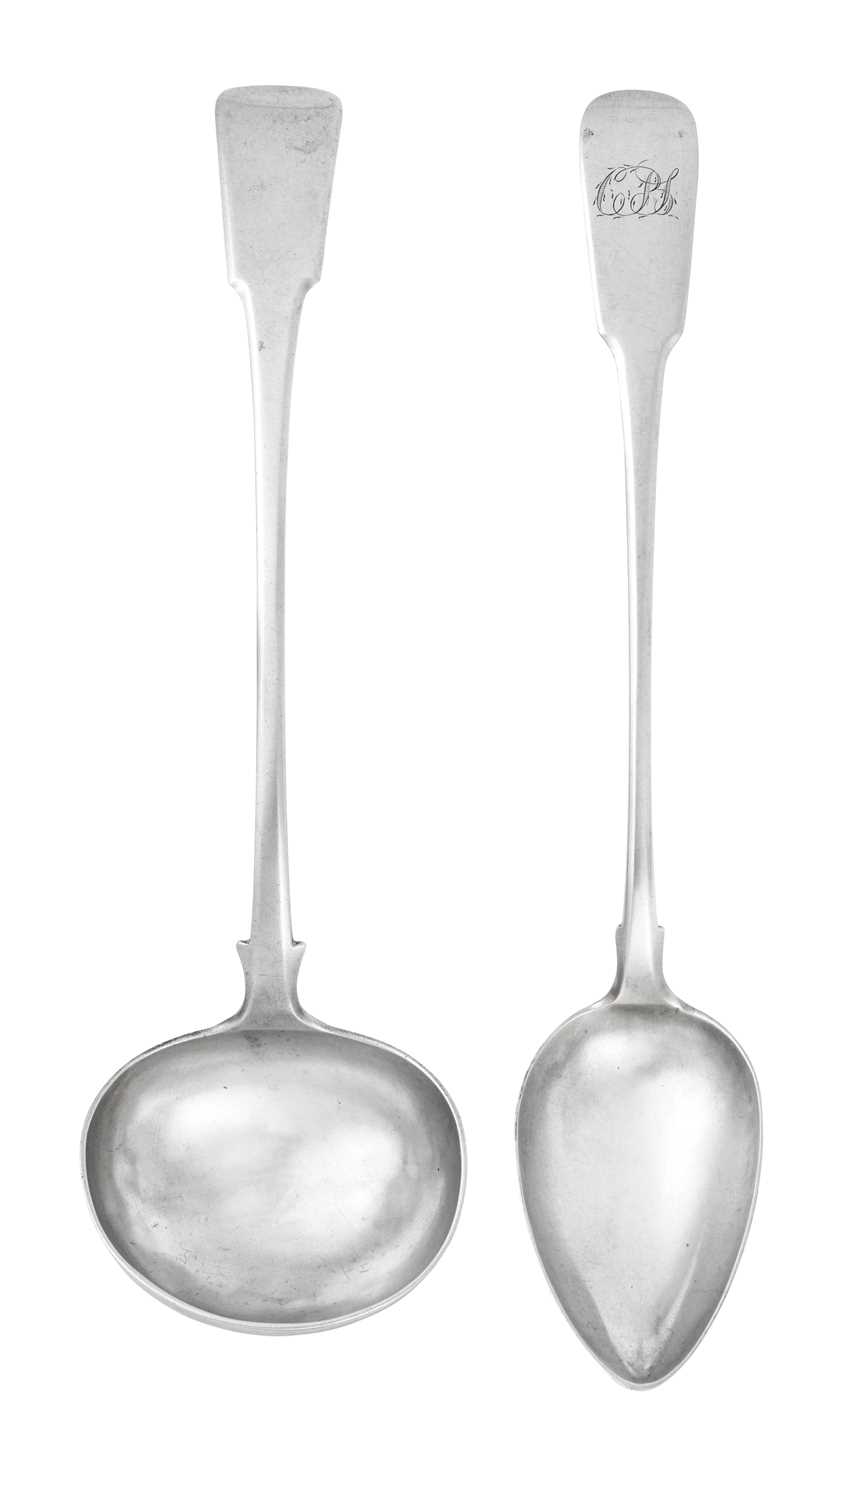 A Maltese Silver Soup-Ladle and Basting-Spoon, The Soup-Ladle by Paolo Pace, Circa 1860, The Bastin